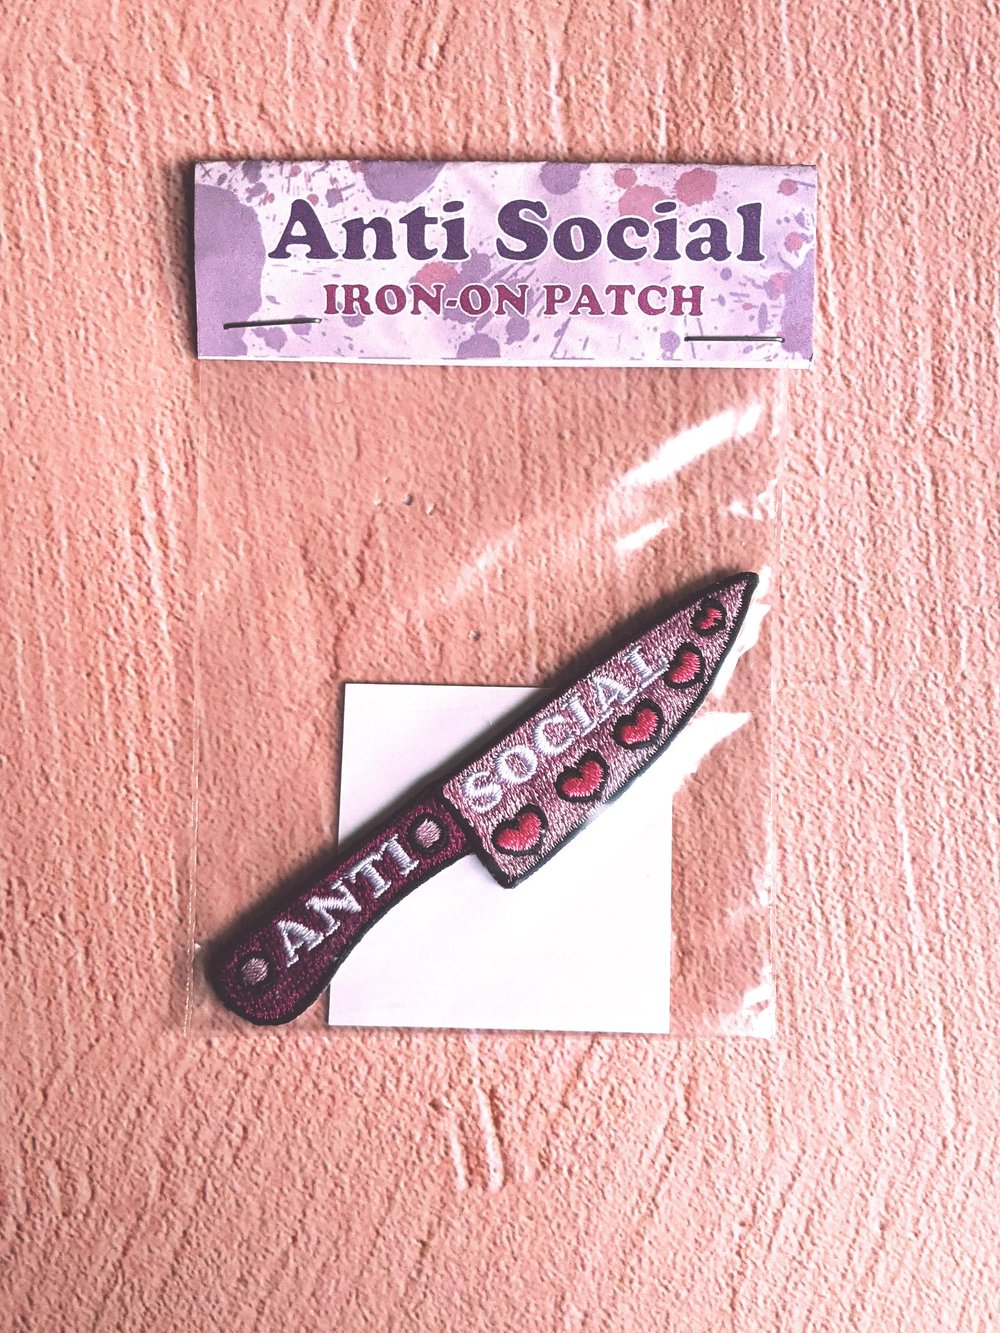 Image of Anti Social Knife Iron-On Patch